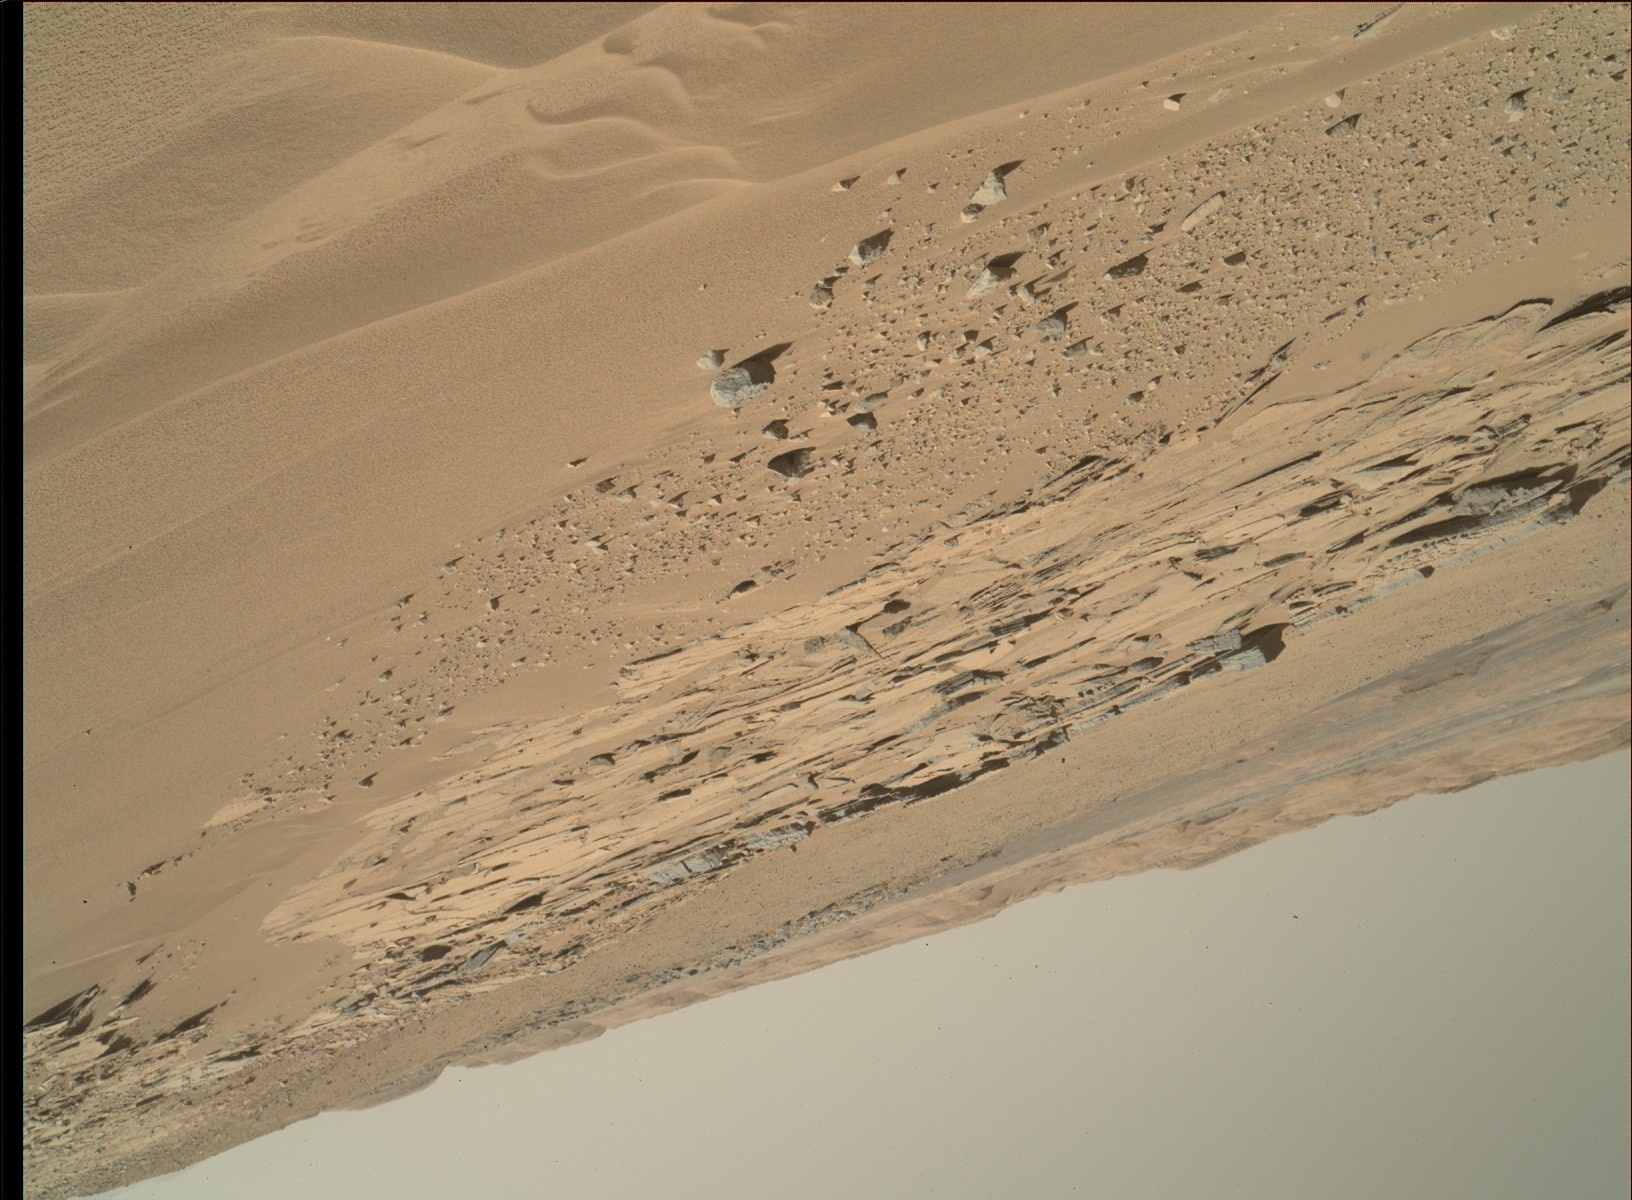 Nasa's Mars rover Curiosity acquired this image using its Mars Hand Lens Imager (MAHLI) on Sol 606